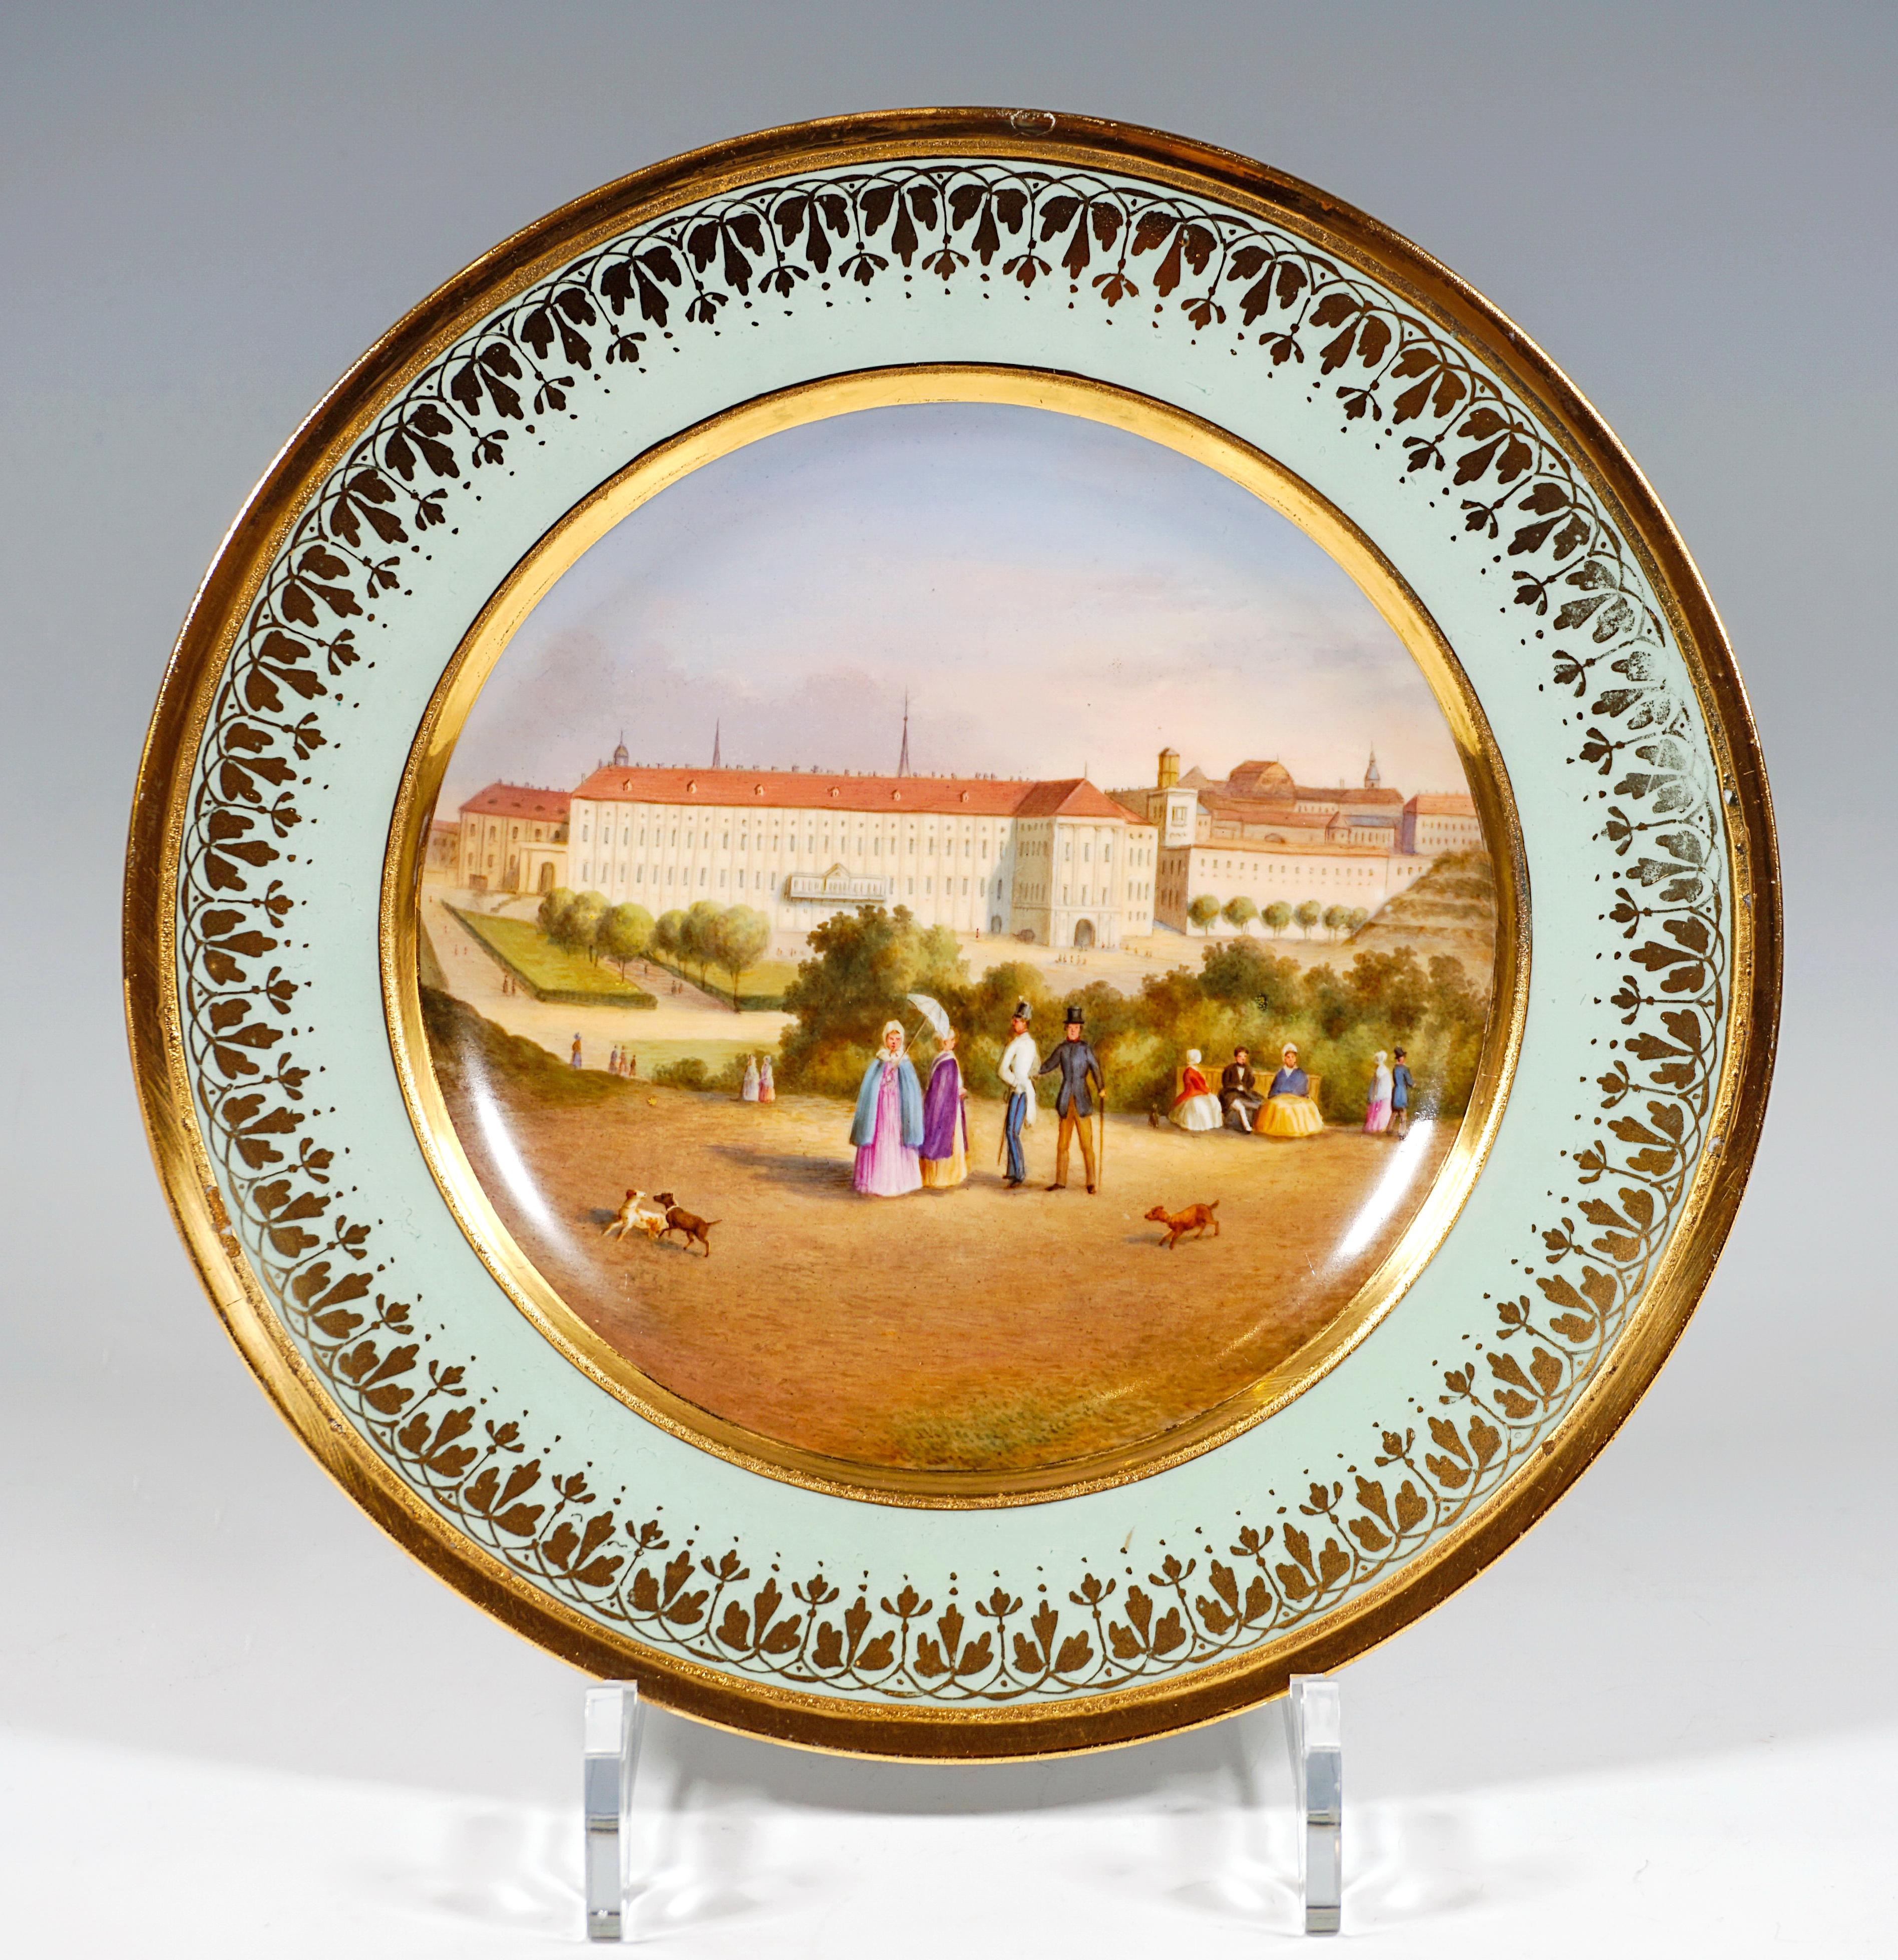 Porcelain picture plate with a fine polychrome painted veduta: in the mirror a view of the Vienna Hofburg, the Leopoldine Wing with ceremonial apartments and the outer Burgplatz, seen from the Glacis, with a staffage 
of figures. The Viennese